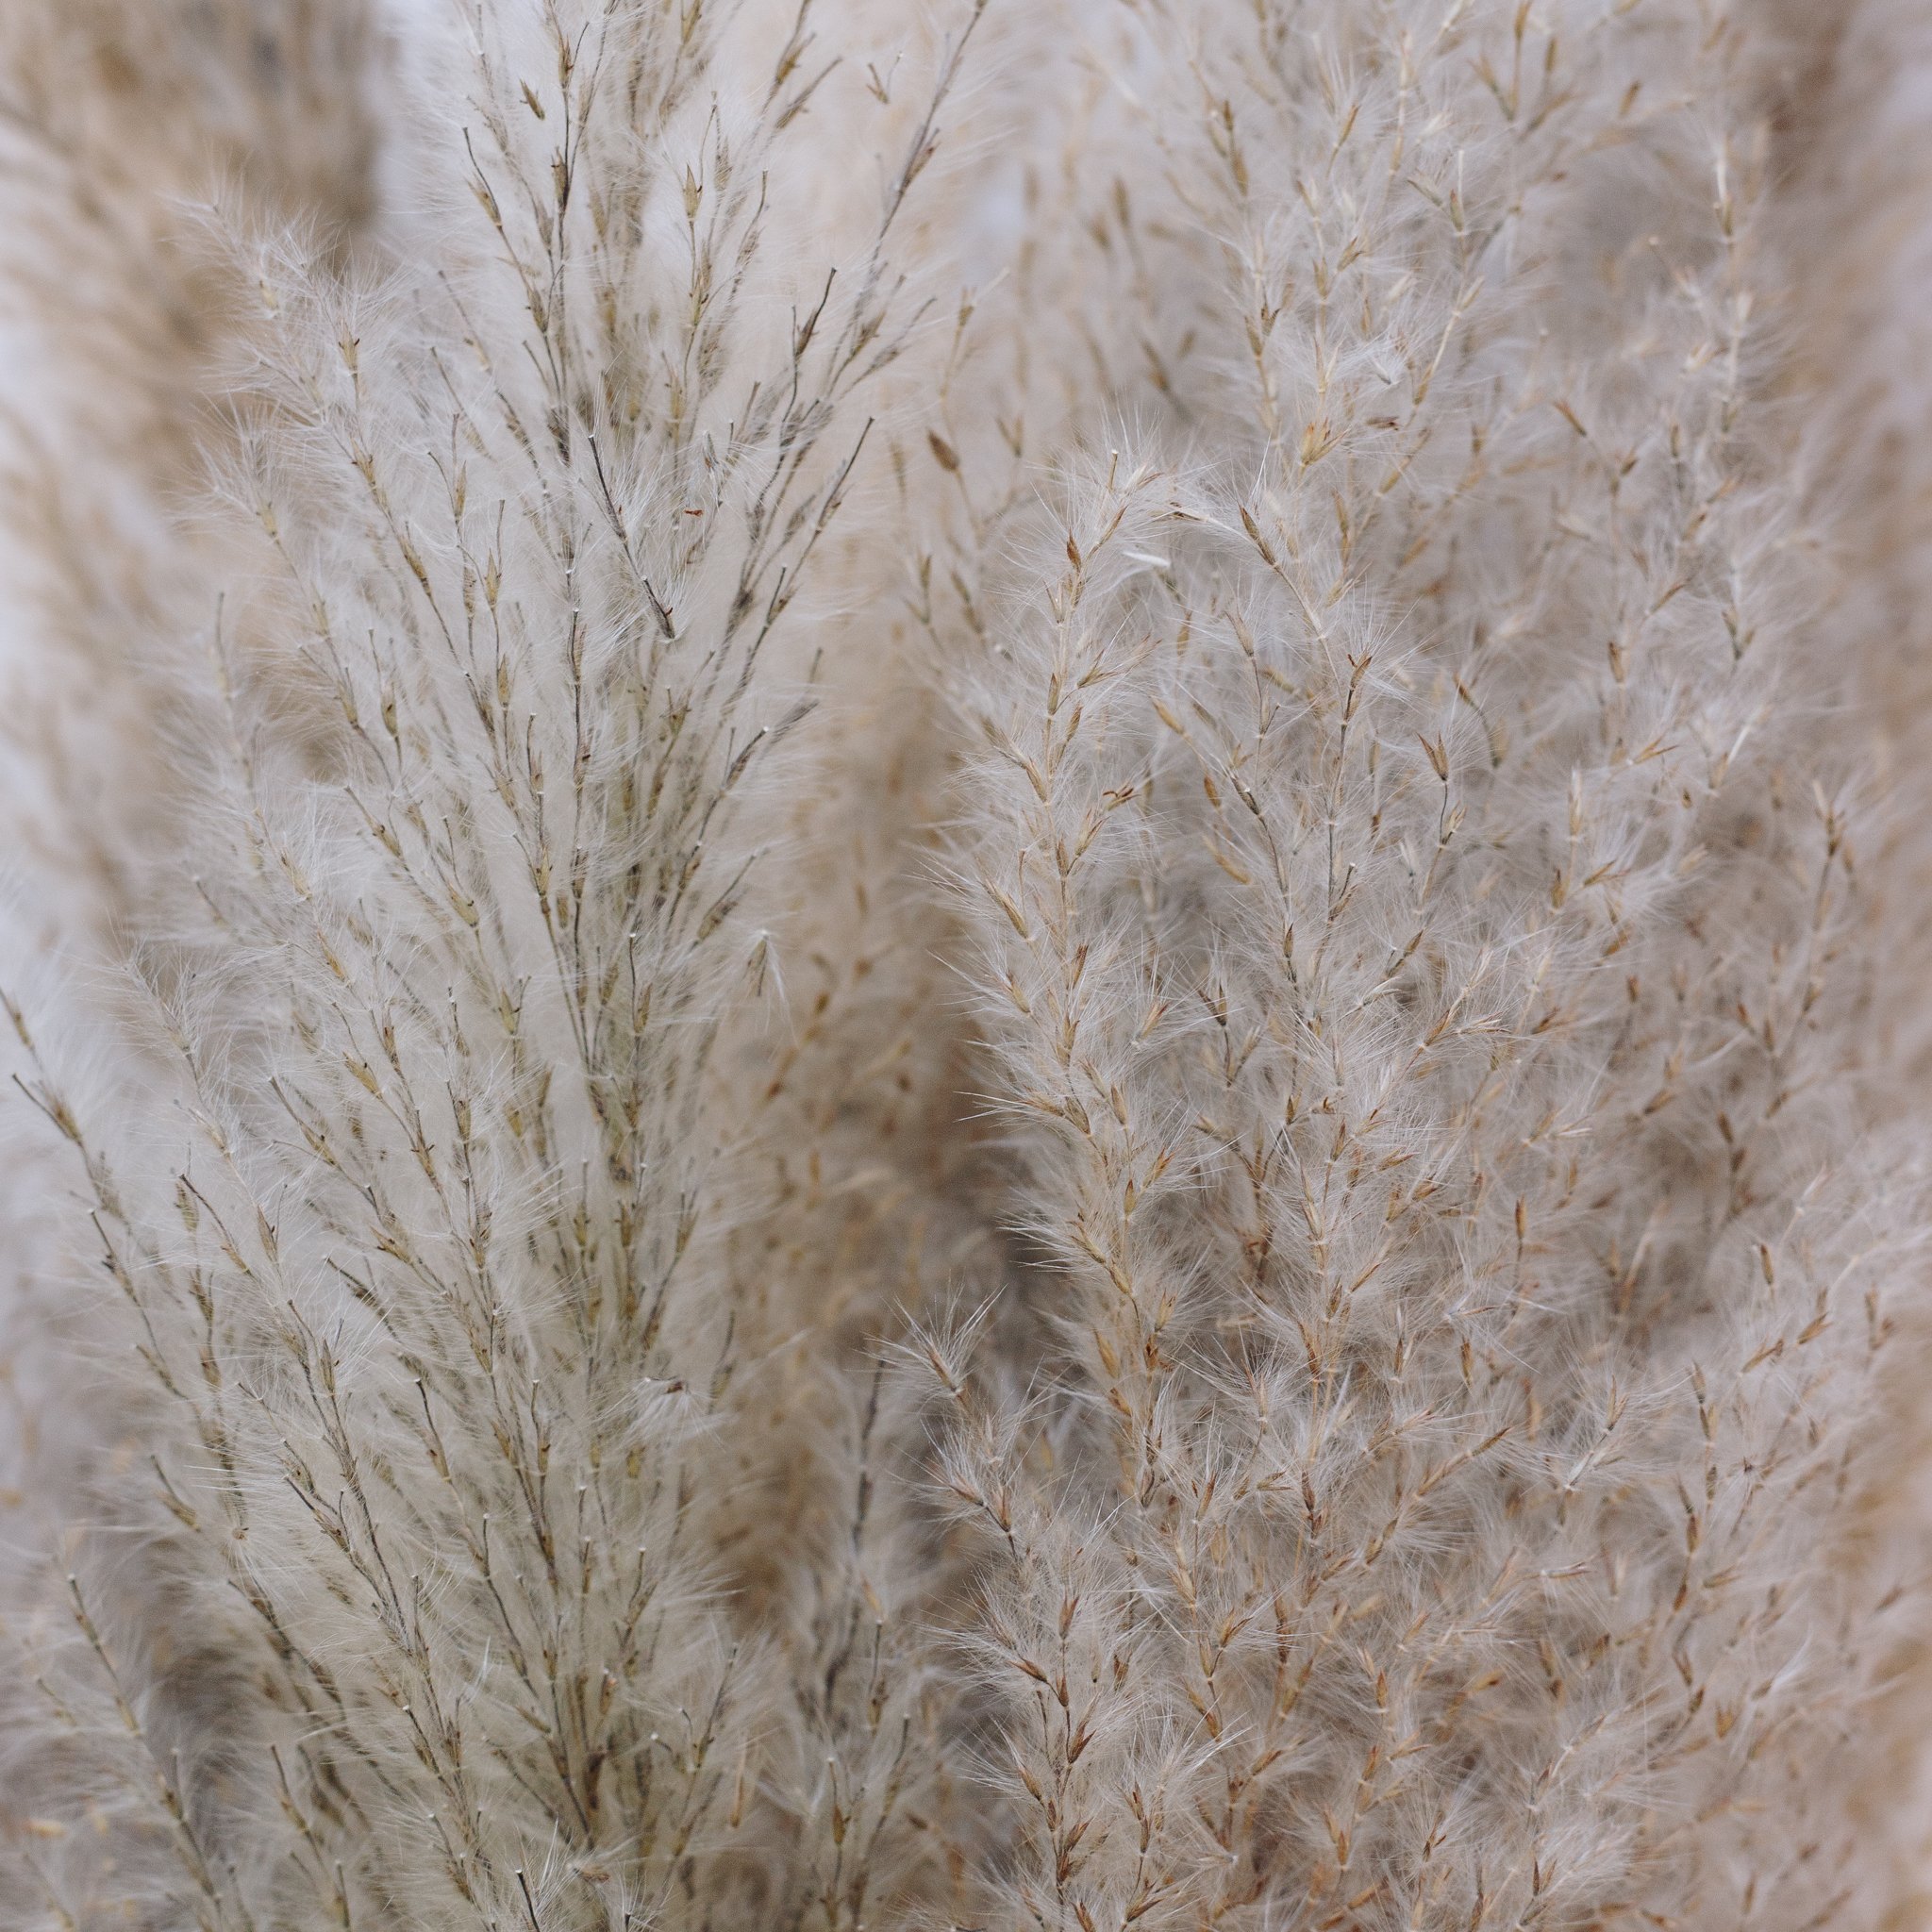 Dried Natural Pampas Grass (in Home Depot stores)